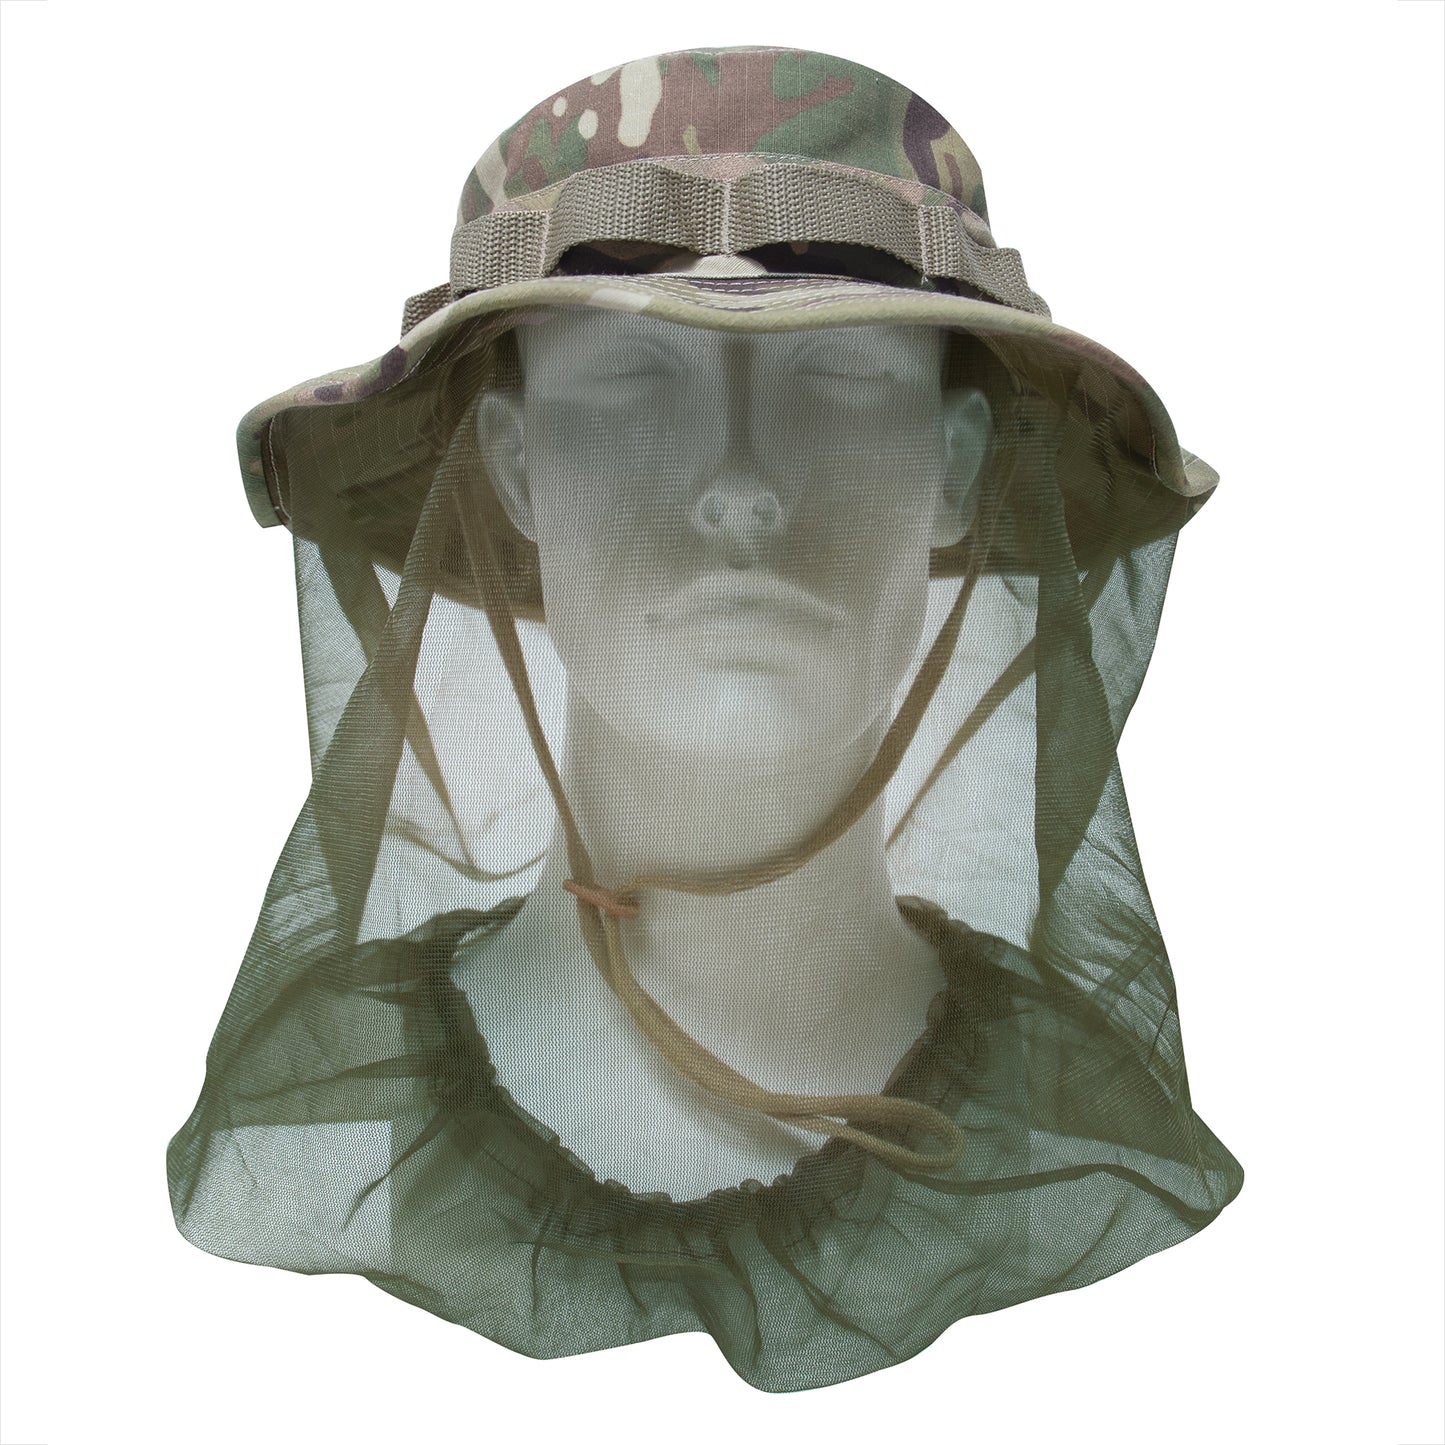 Milspec Boonie Hat With Mosquito Netting Boonie Hats MilTac Tactical Military Outdoor Gear Australia